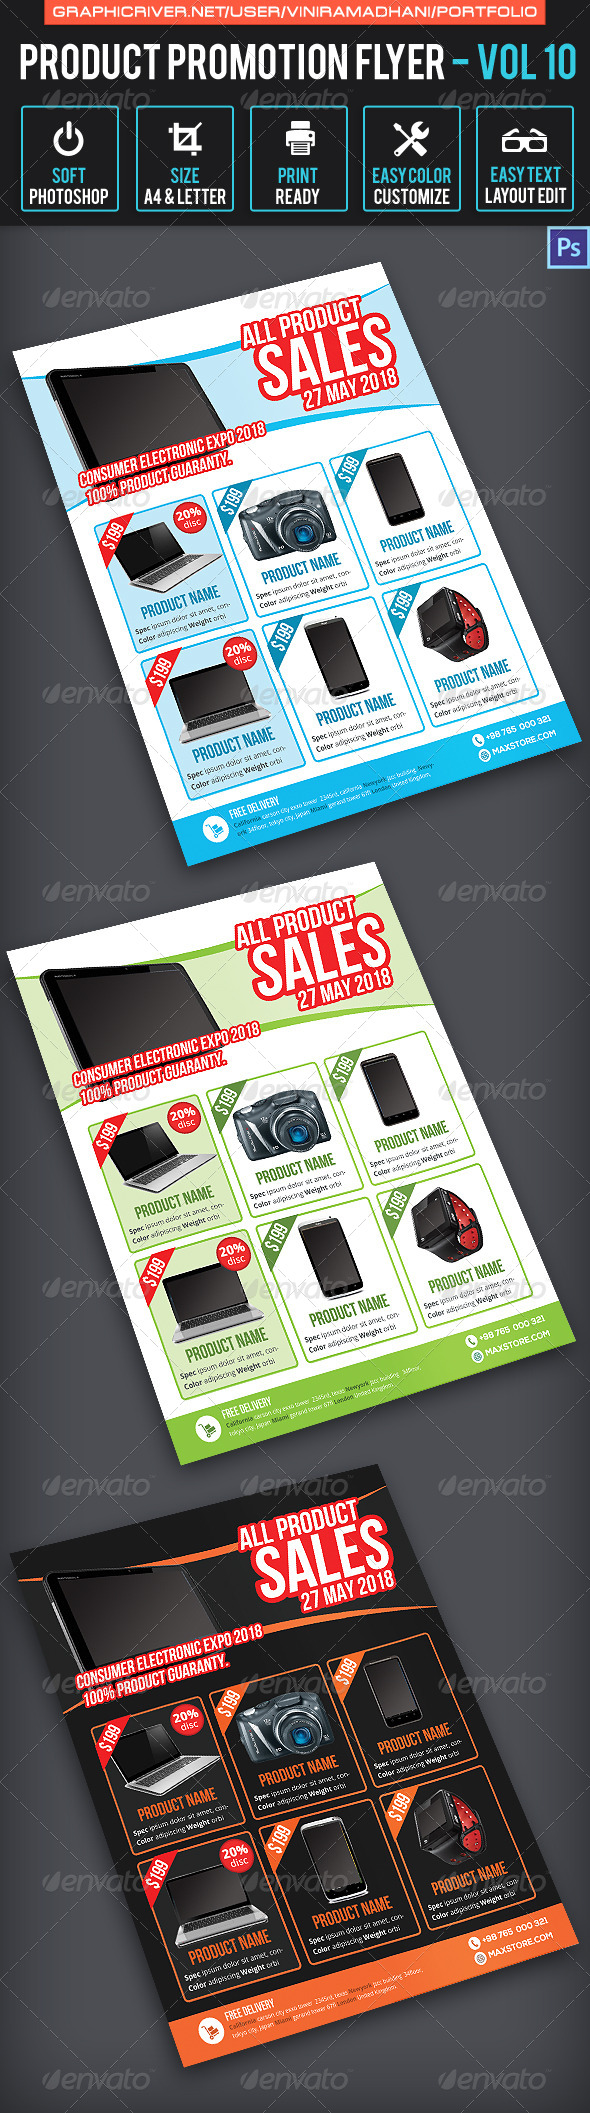 GraphicRiver Product Promotion Flyer Volume 10 7658076